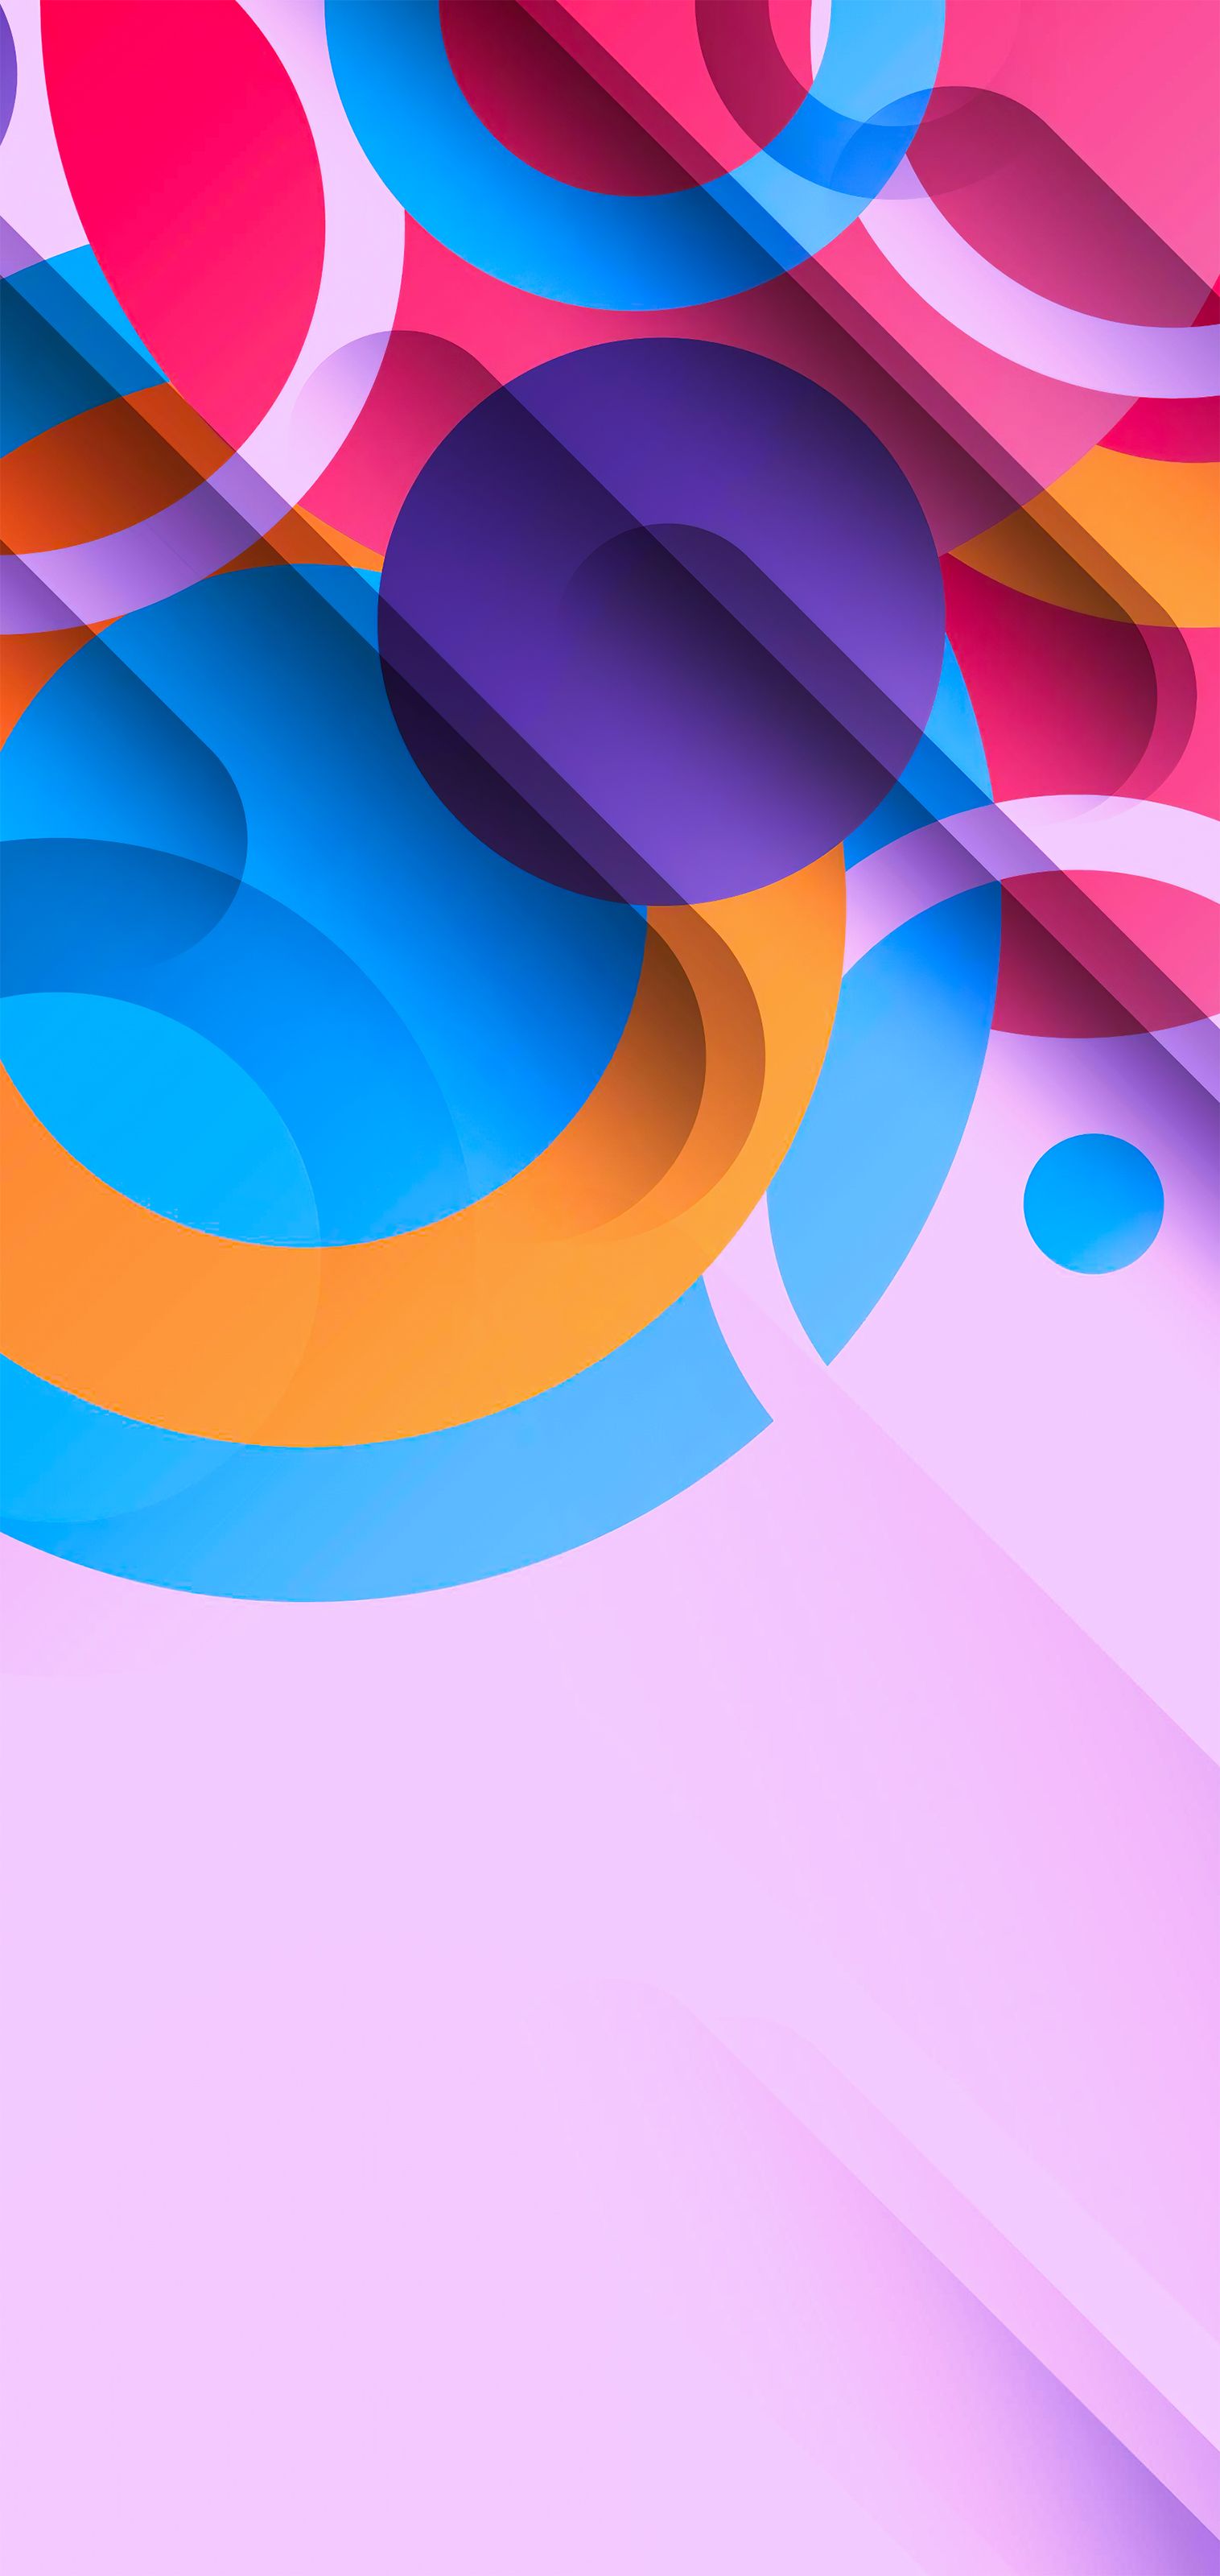 Digital Abstract Shapes 4K Cool 2021 Art Wallpapers